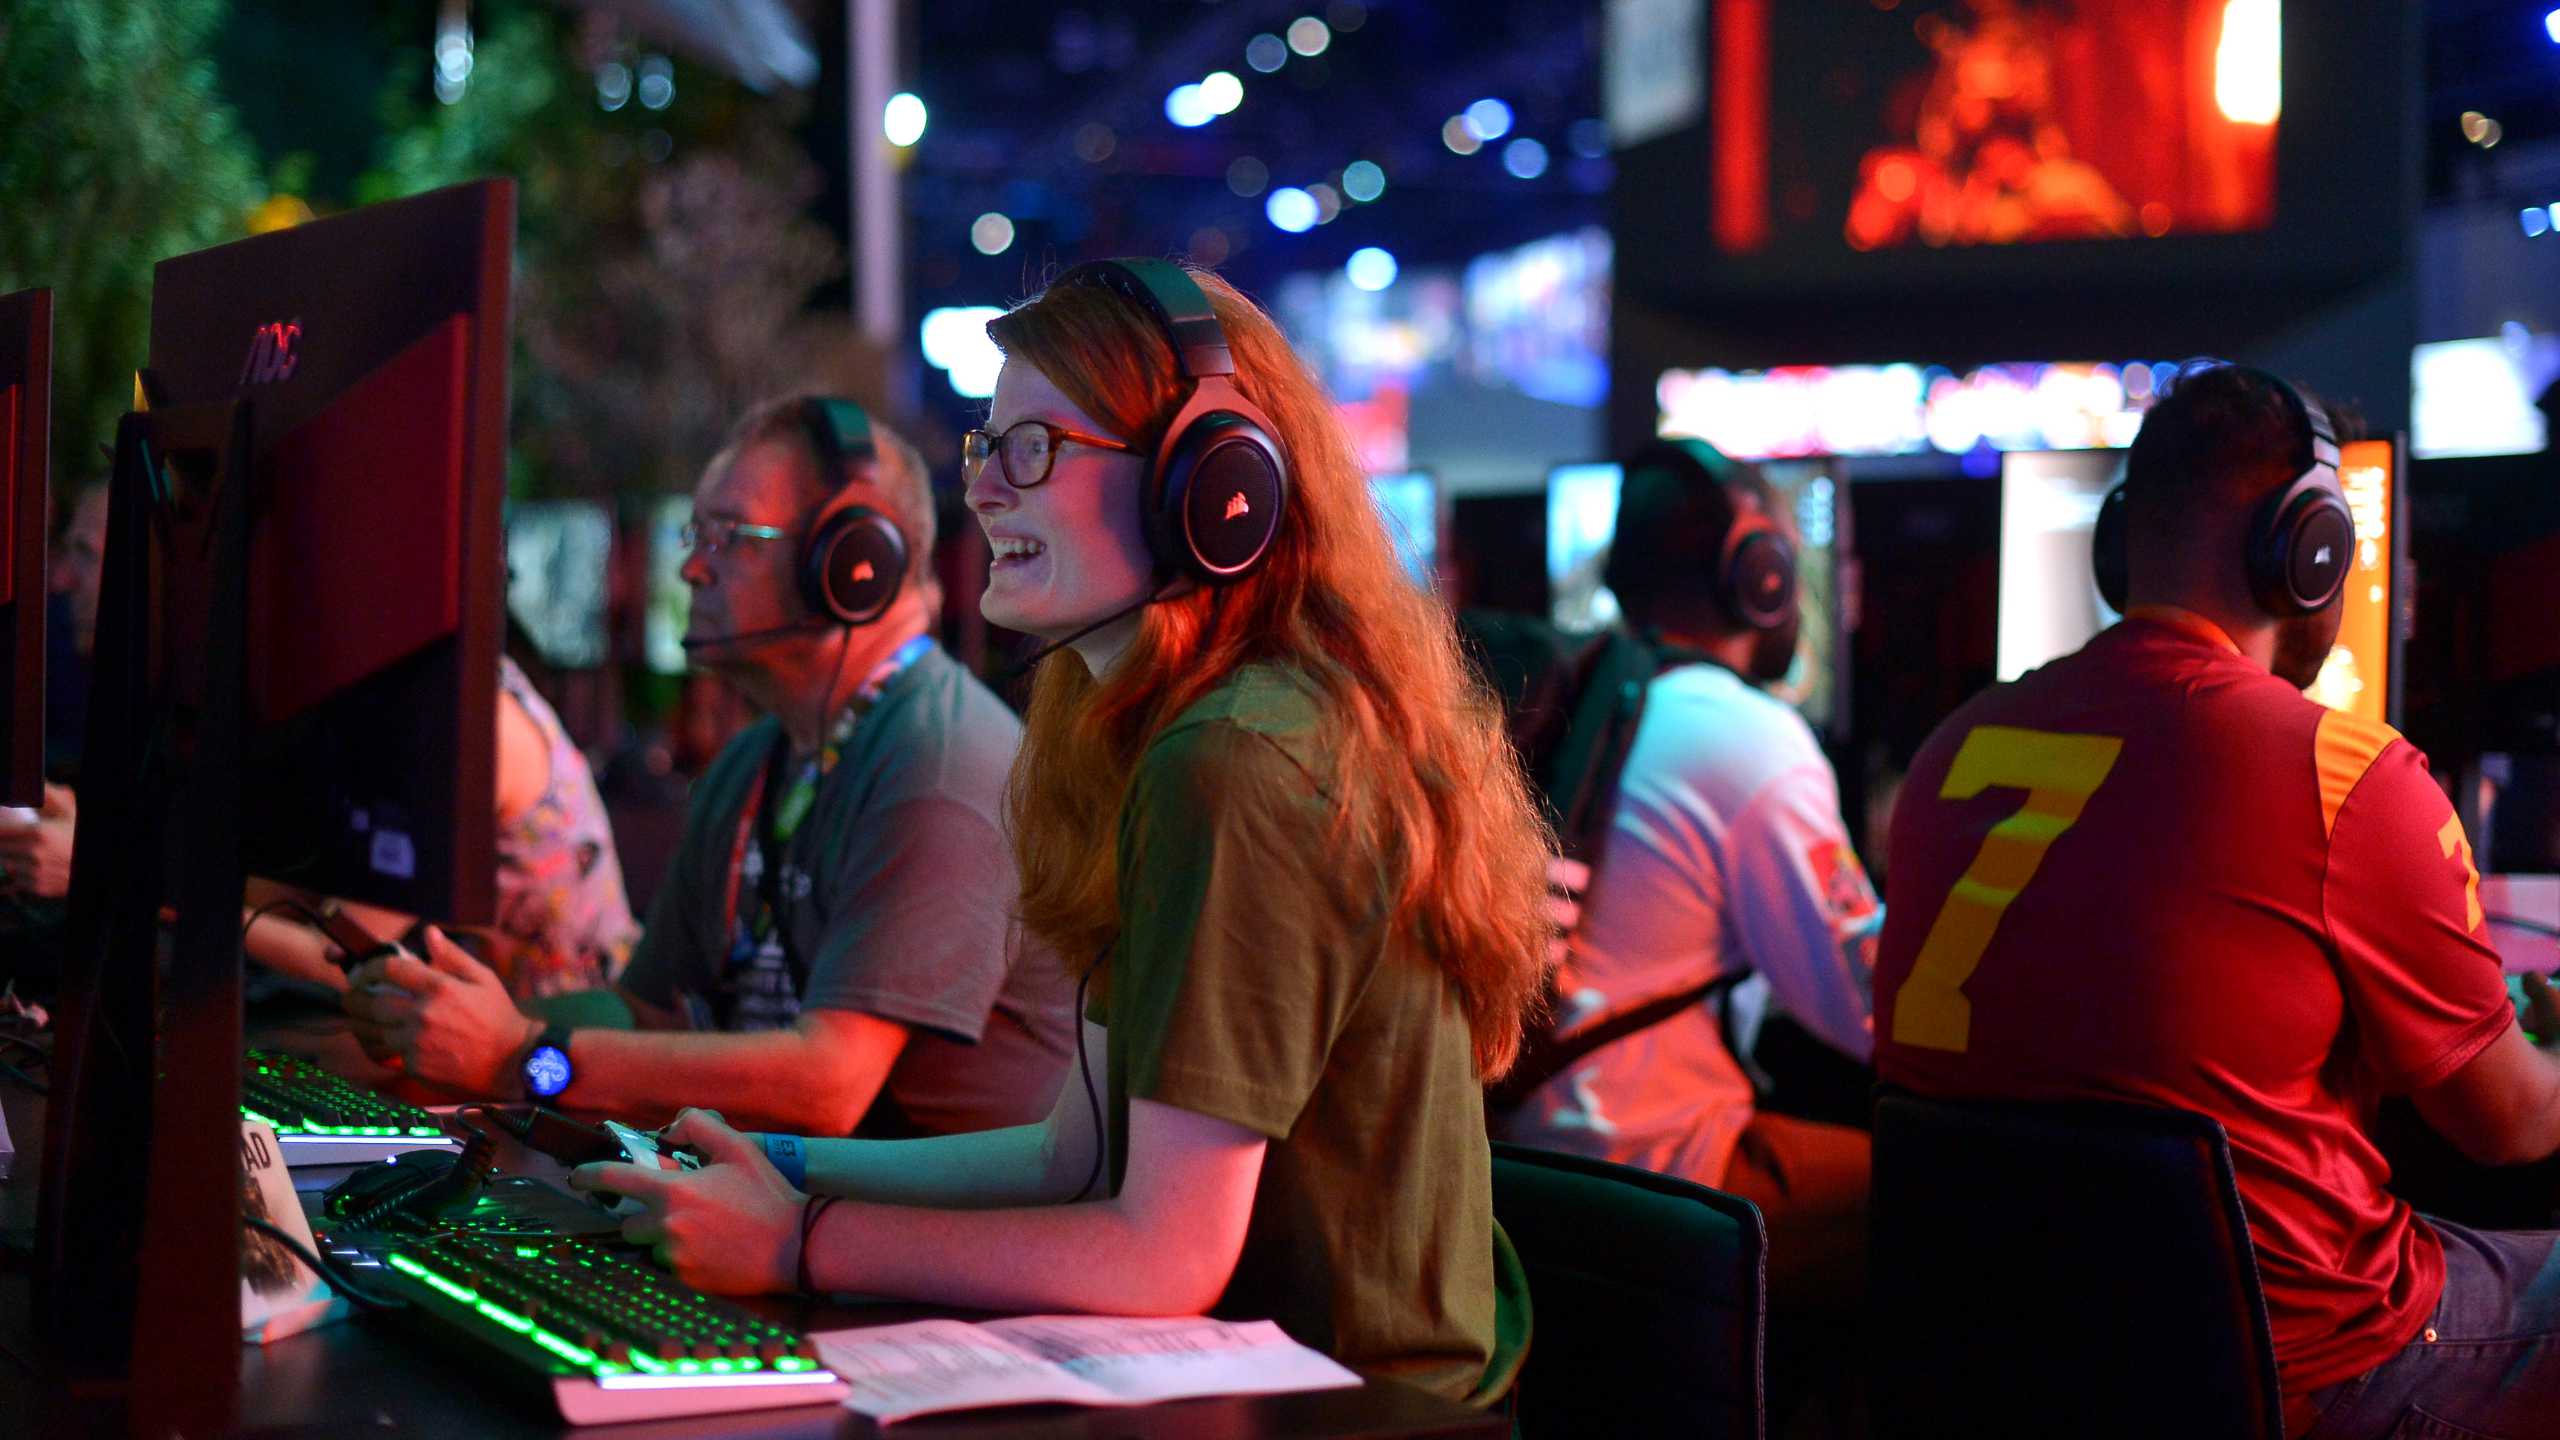 E3 - The World's Premier Event for Video Games South Hall - Day 1